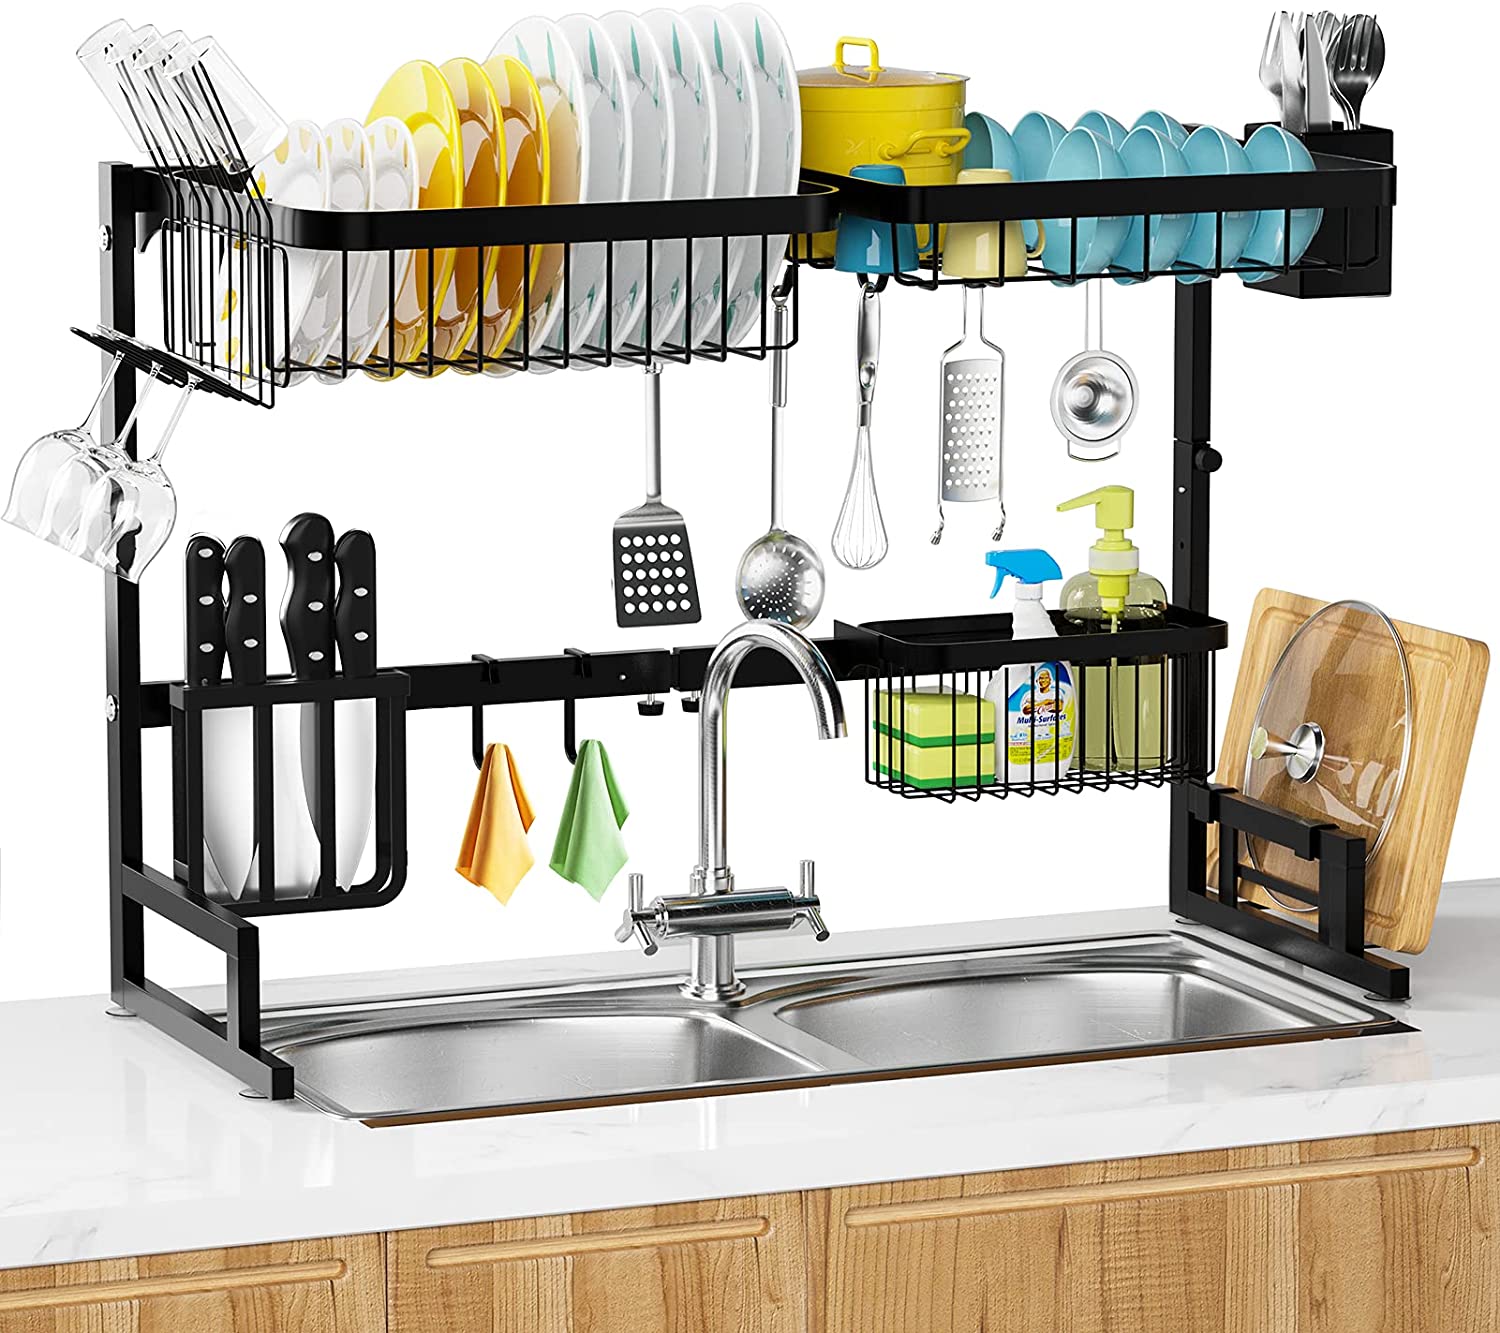  7. MERRYBOX Adjustable Large Over The Sink Dish Drying Rack with 8 Hooks 